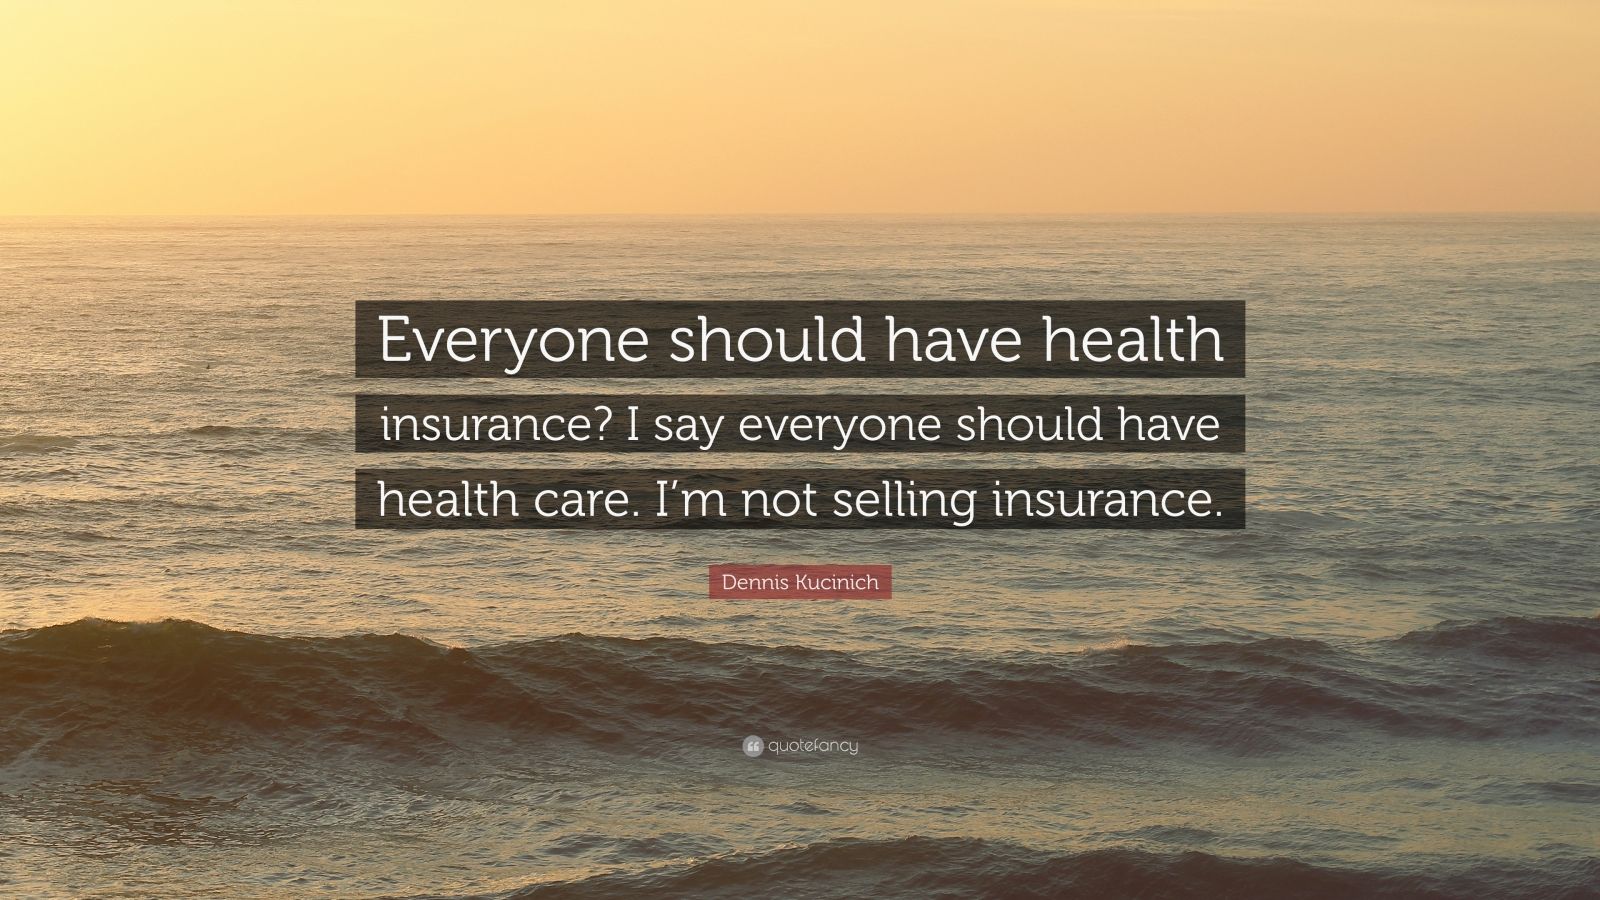 Dennis Kucinich Quote “Everyone should have health